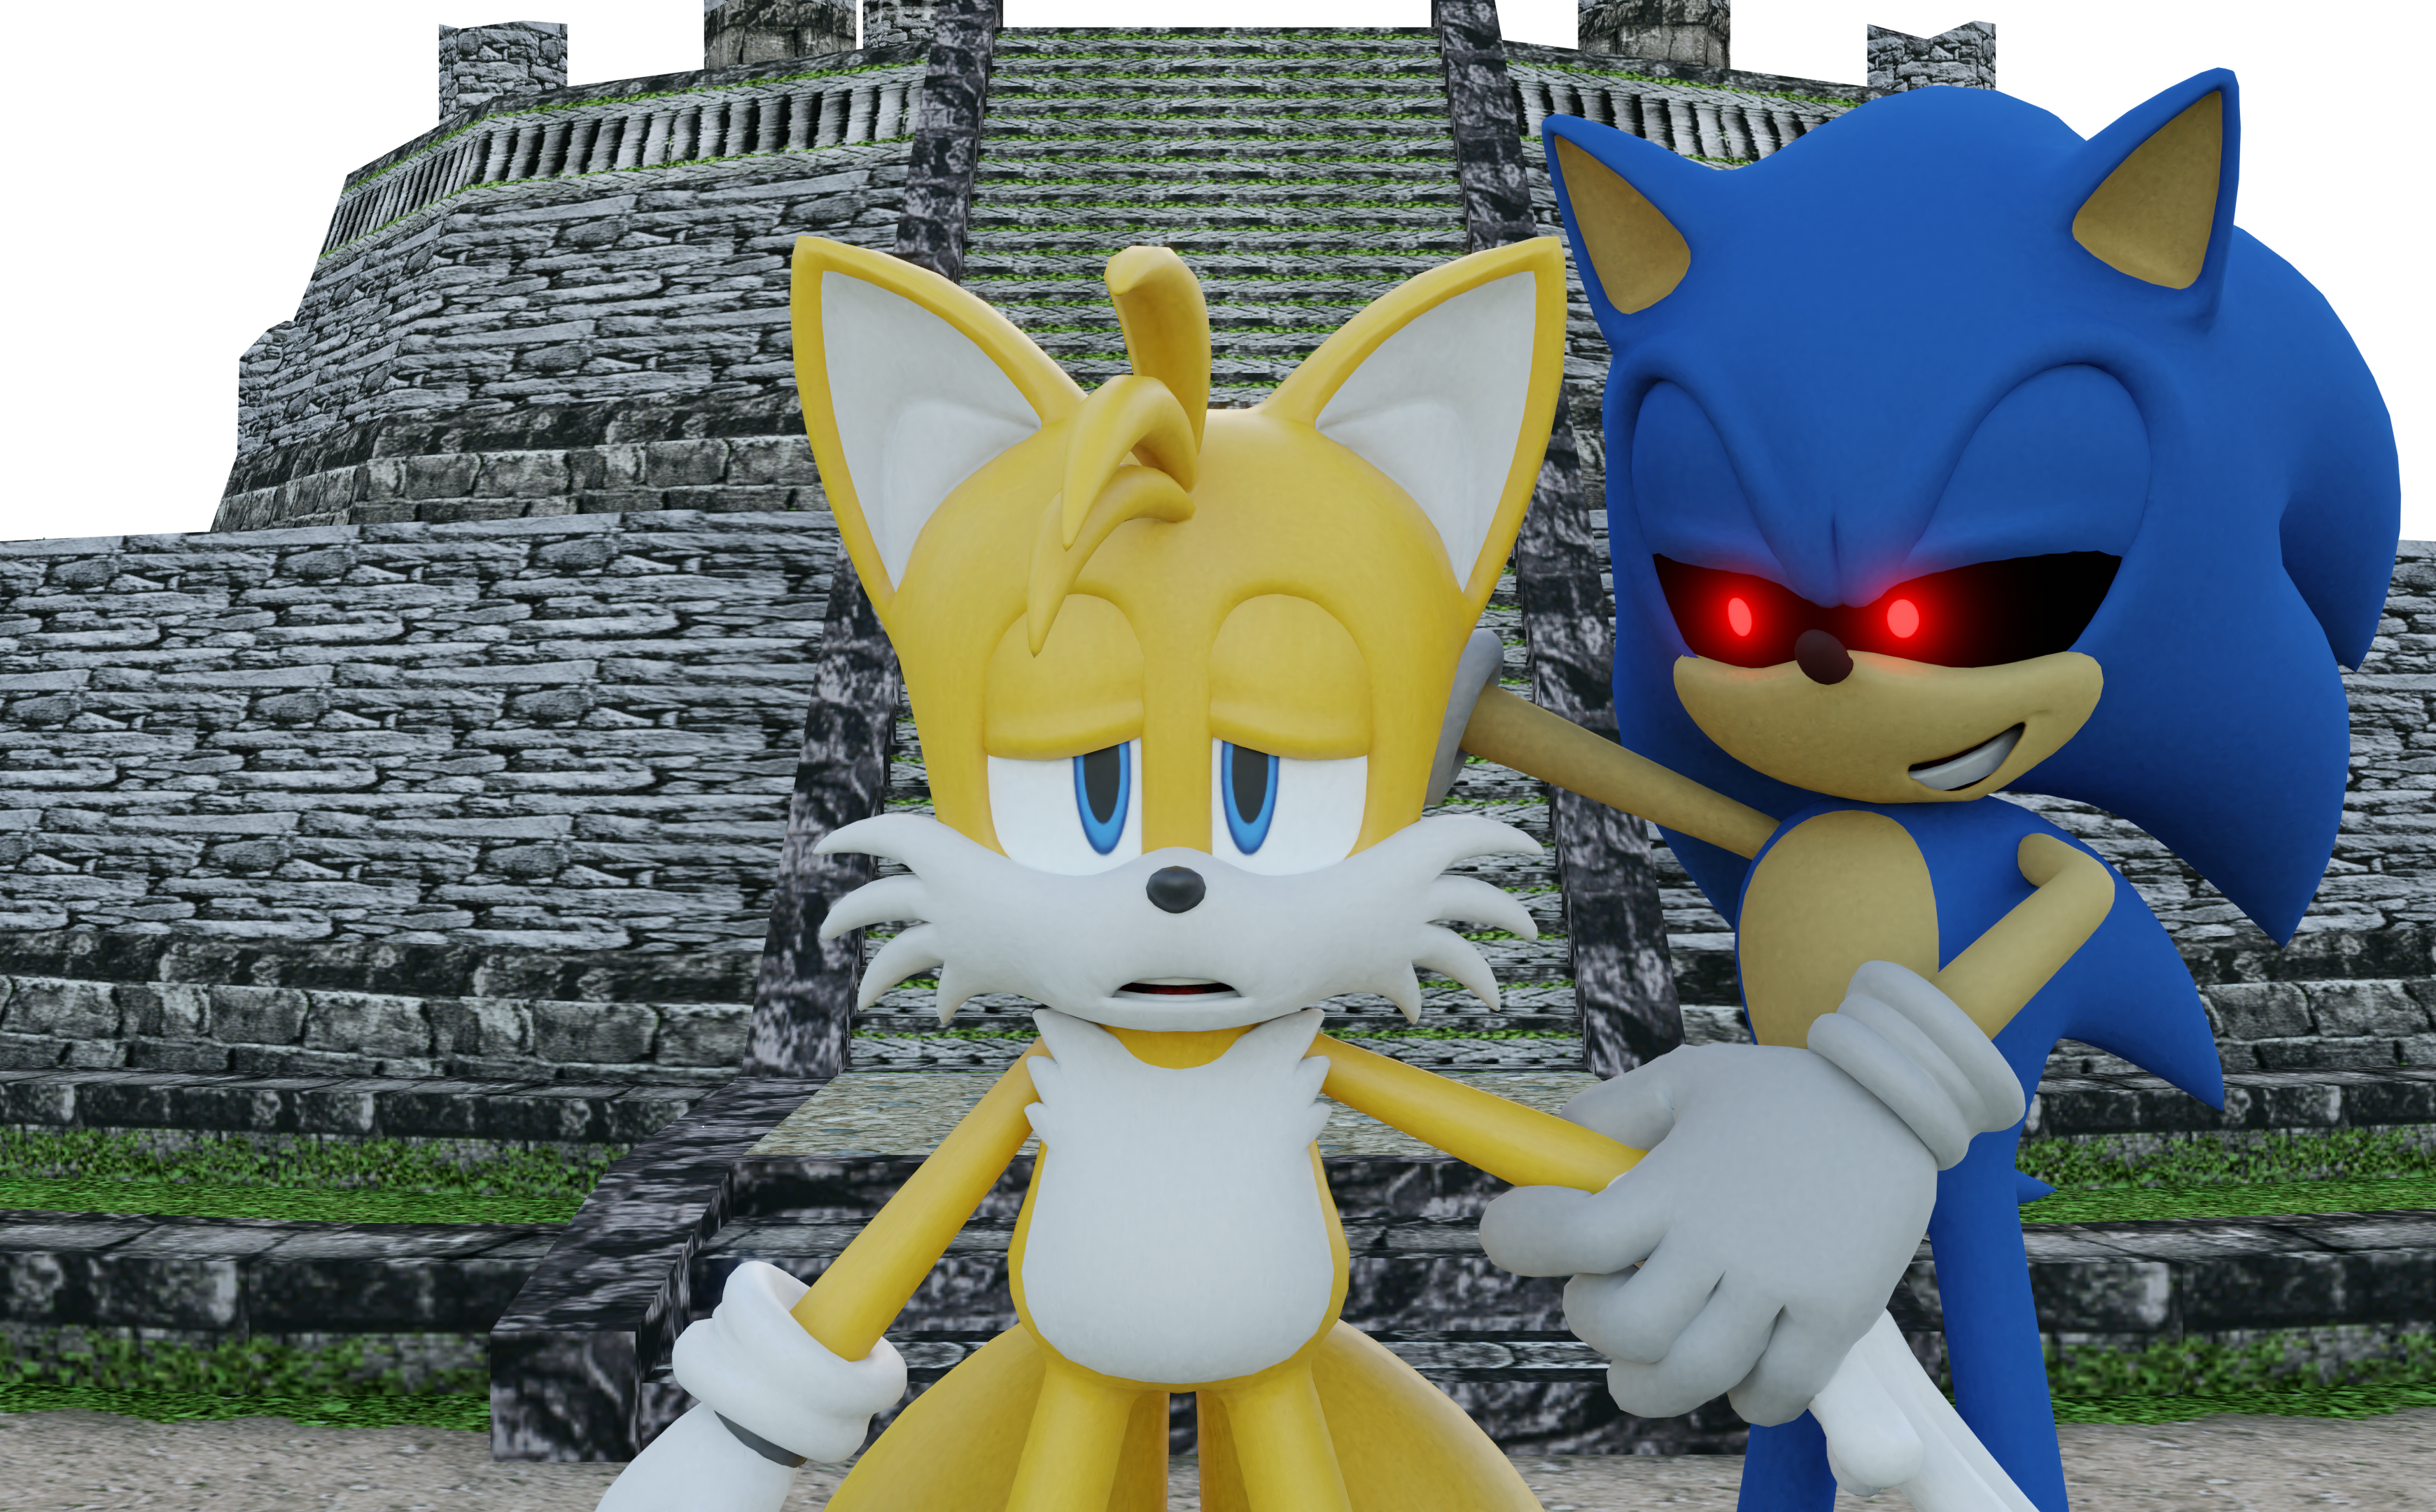 Tails.exe Jumpscare Render by S213413 on DeviantArt